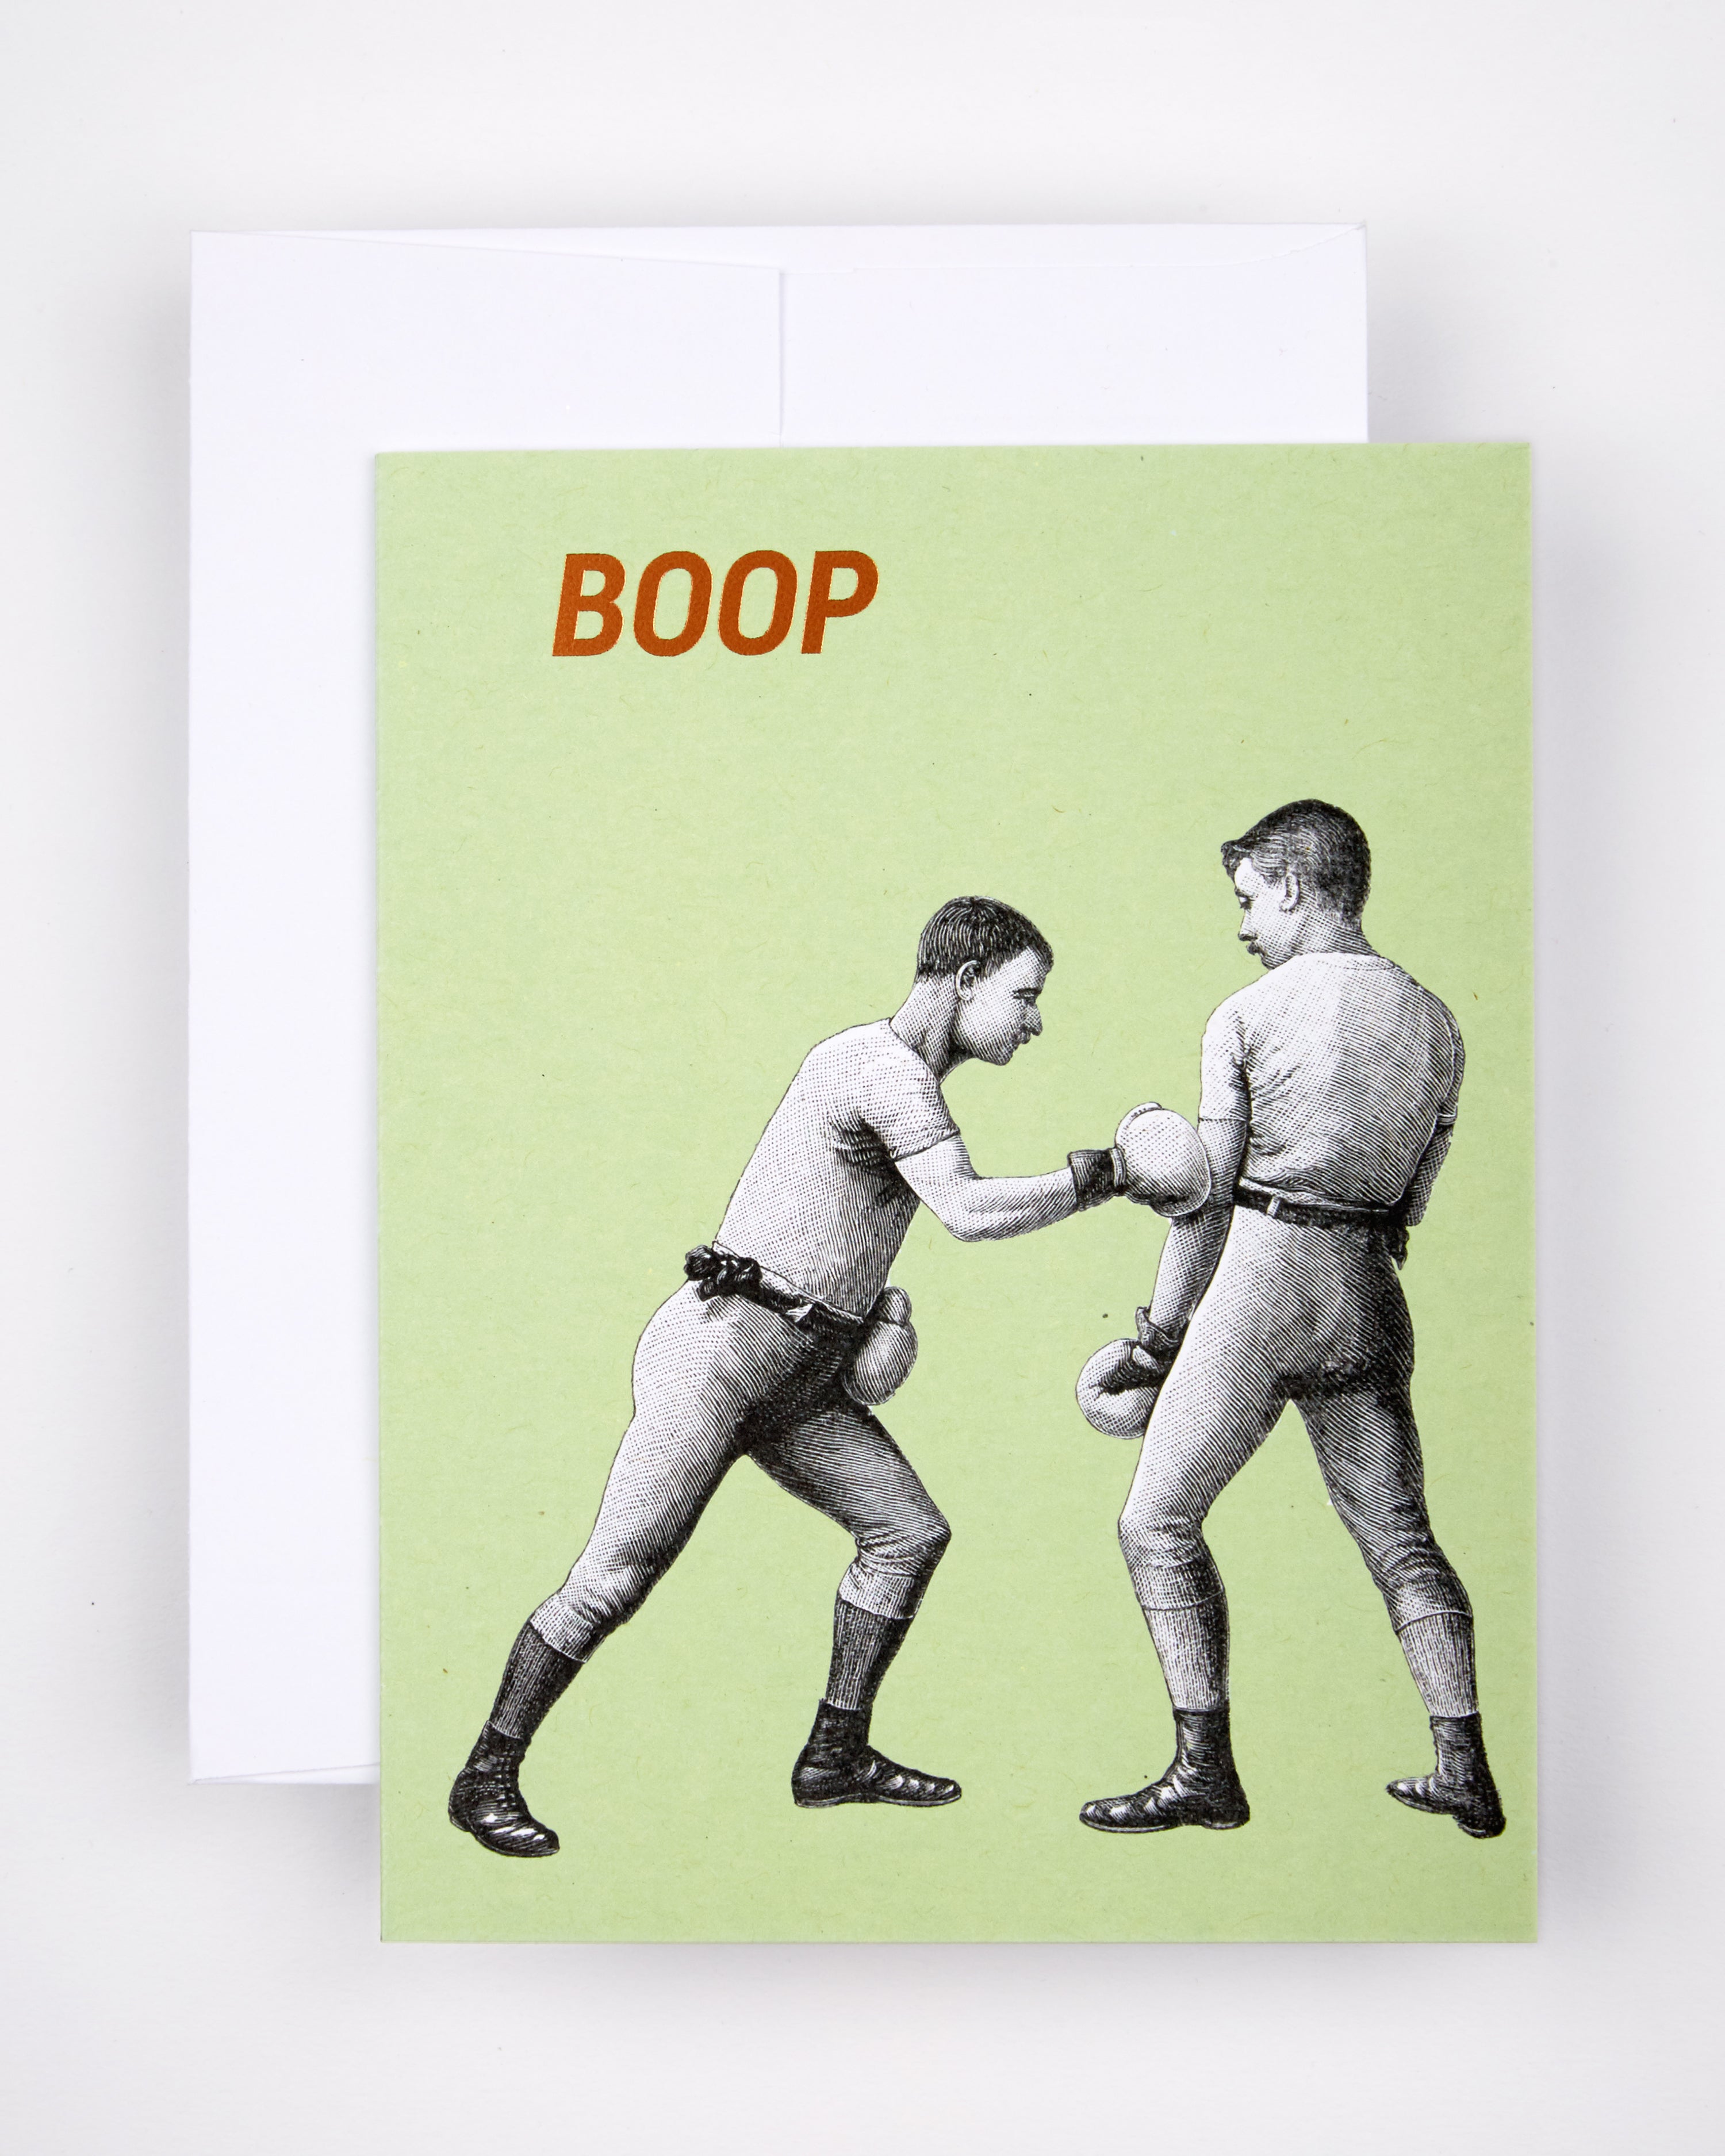 Greeting card printed with the text Boop and two vintage boxers